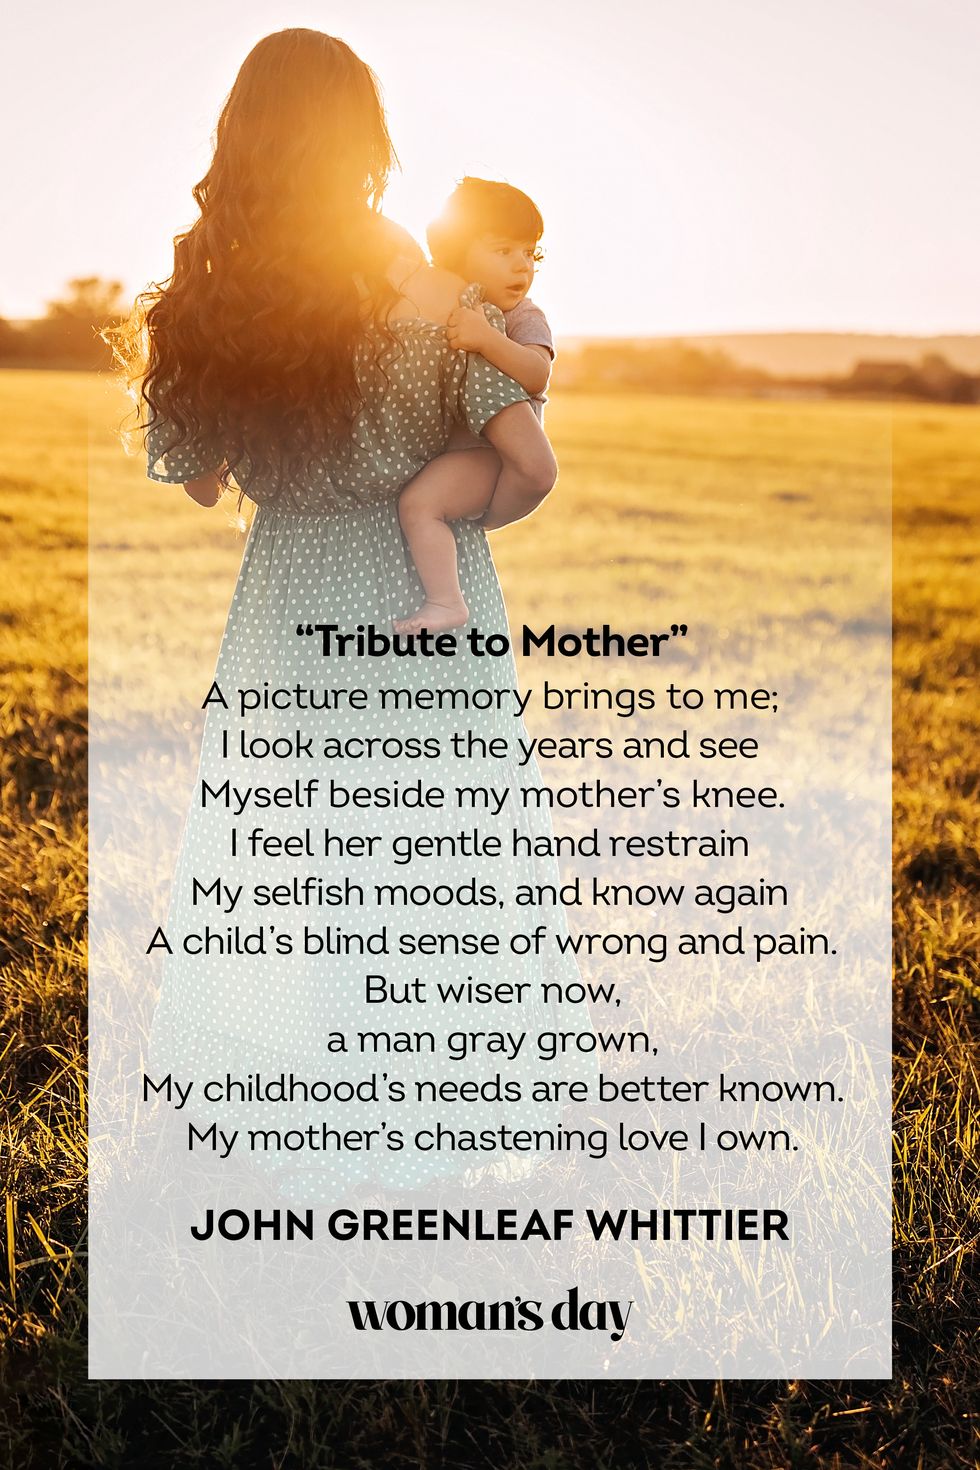 In an ode to Mother's Day on Sunday 14 May, we are pleased to